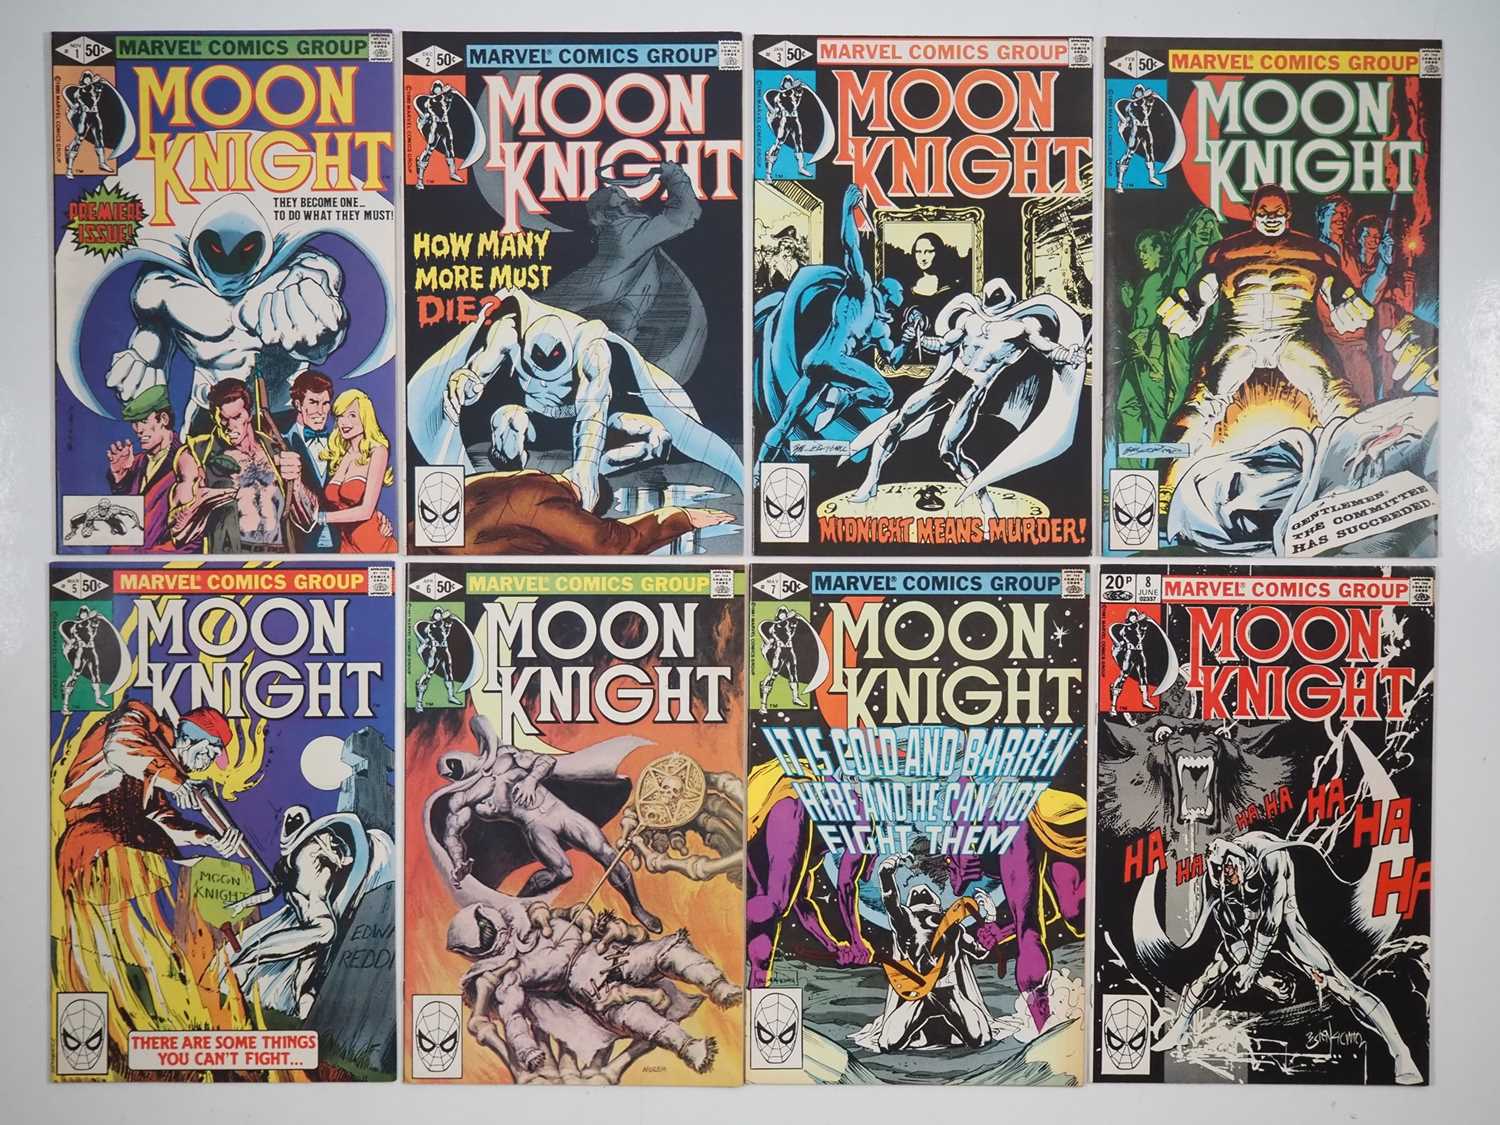 MOON KNIGHT # 1, 2, 3, 4, 5, 6, 7, 8 (8 in Lot) - (1980/81 - MARVEL - US Price & UK Price Variant)